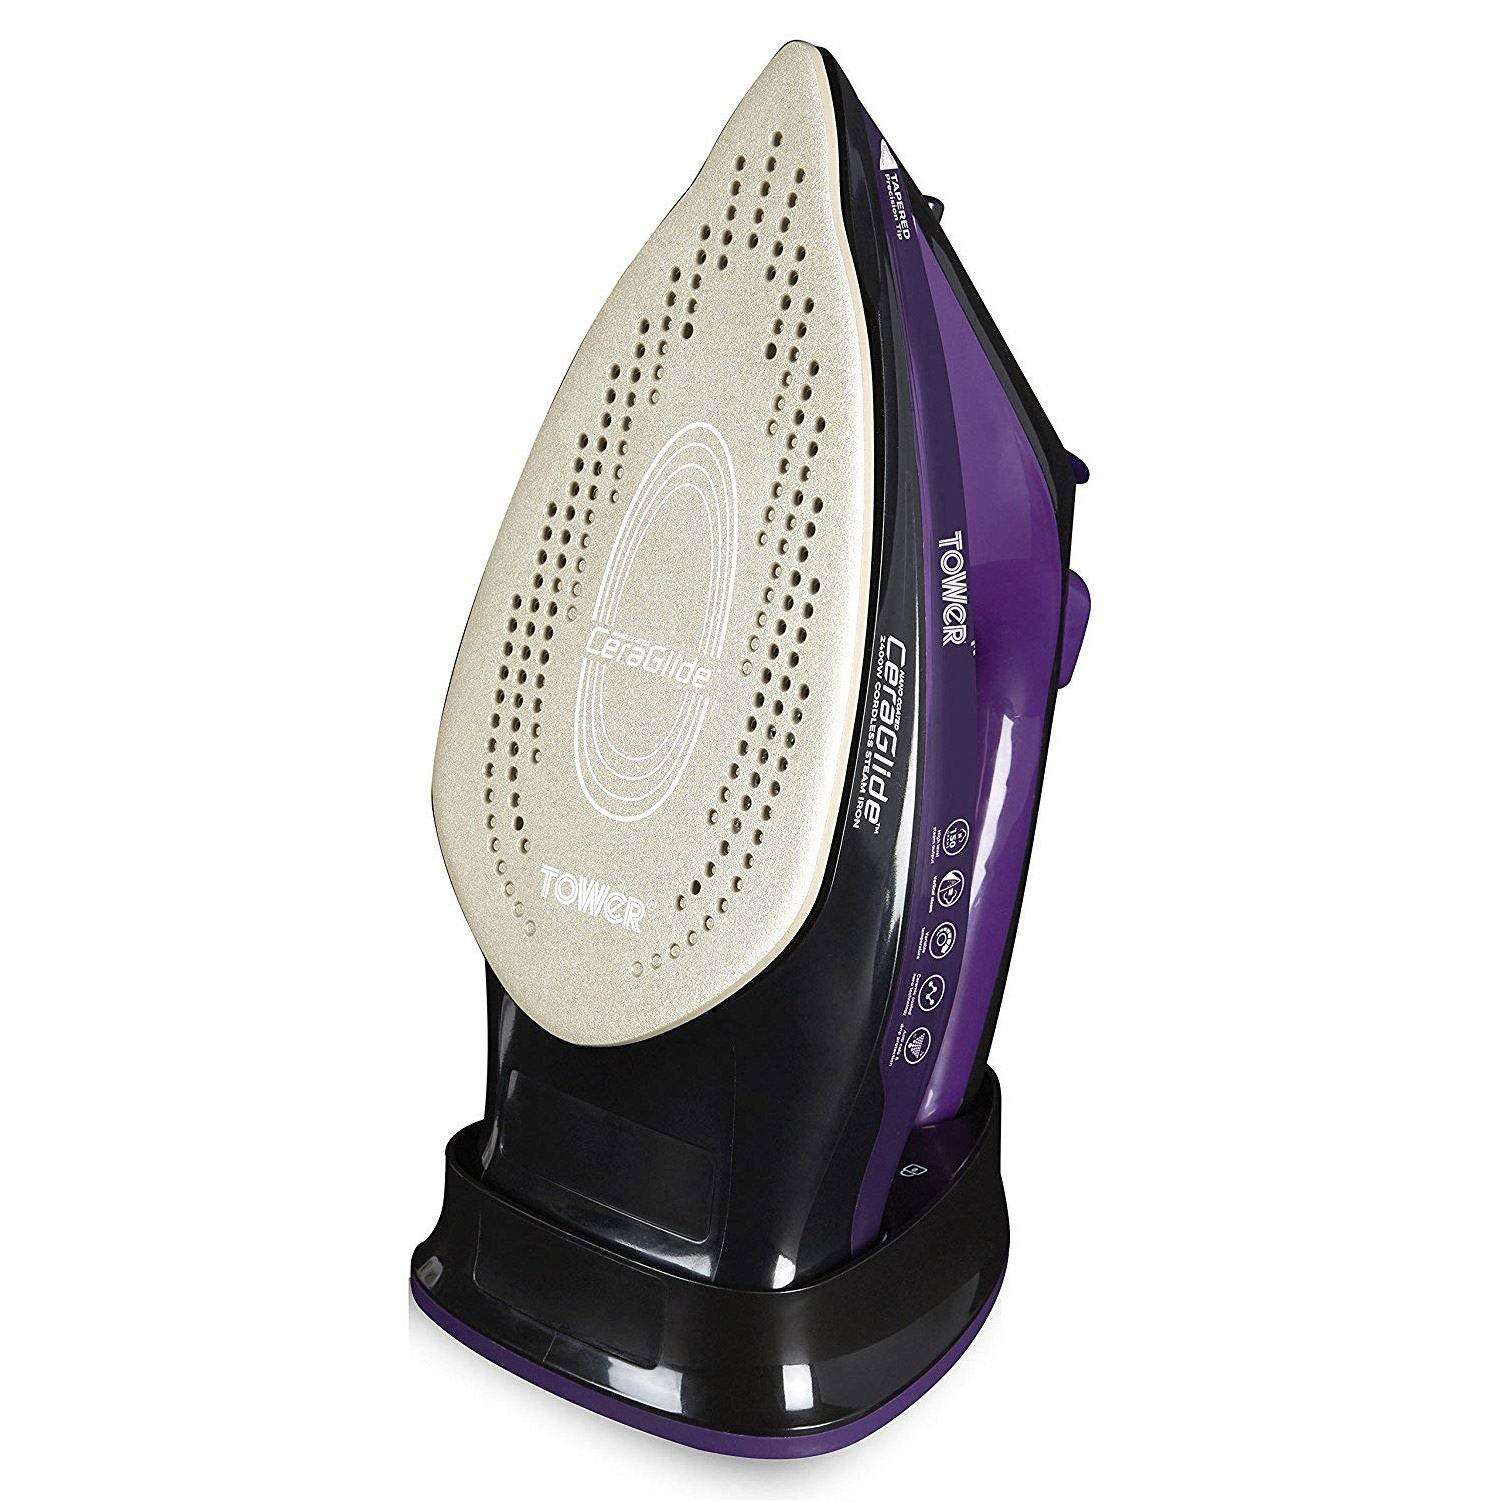 Image of Tower T22008 2 in 1 Cord Cordless Steam Iron in Purple and Black